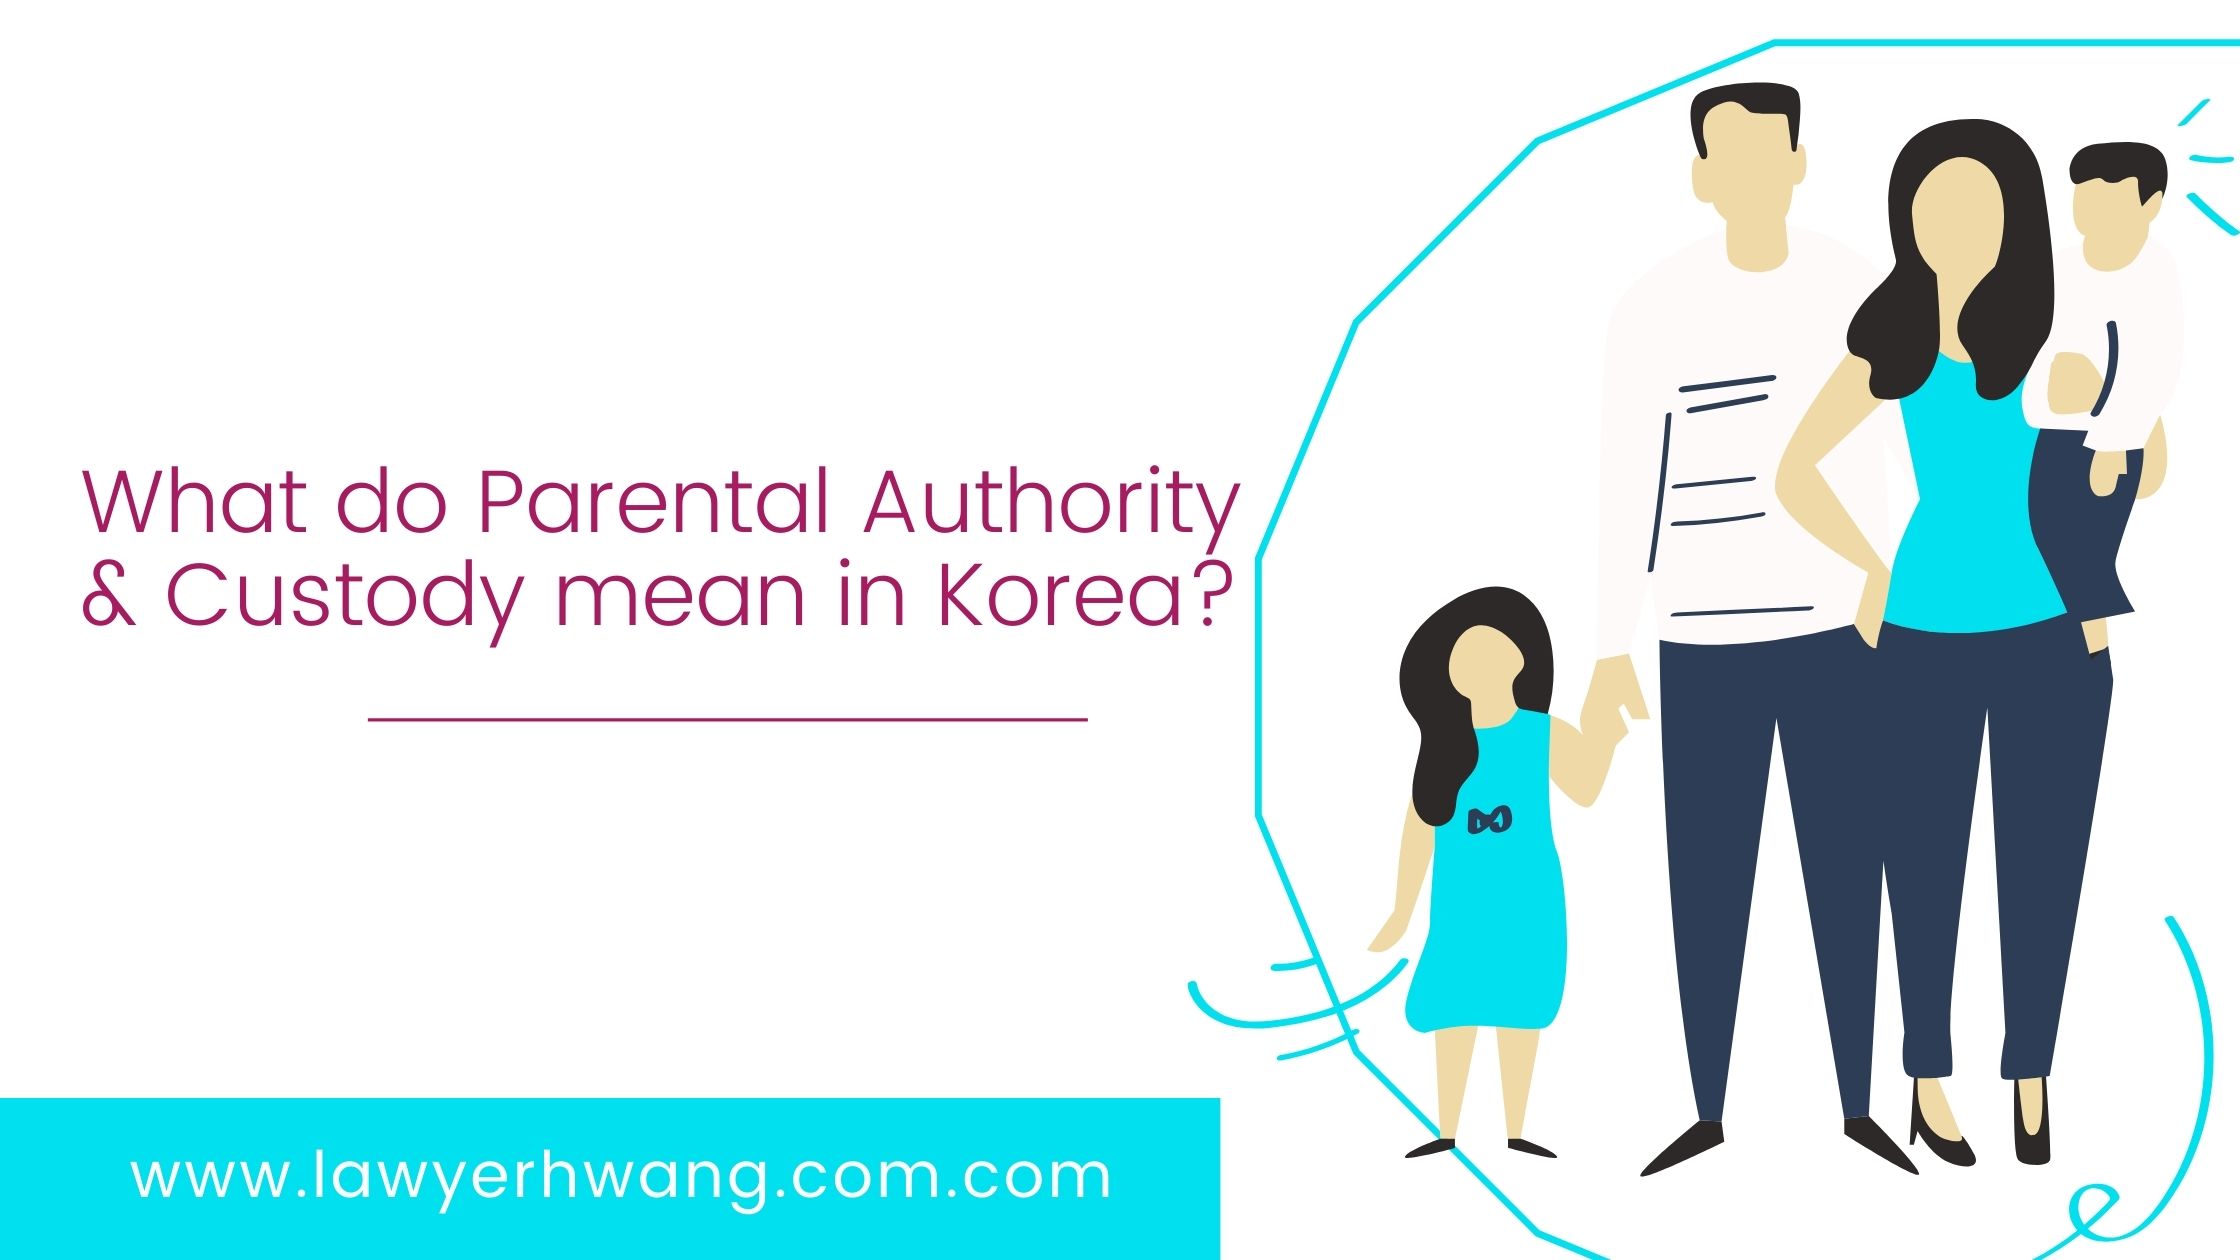 What do Parental Authority and Custody mean in Korea?